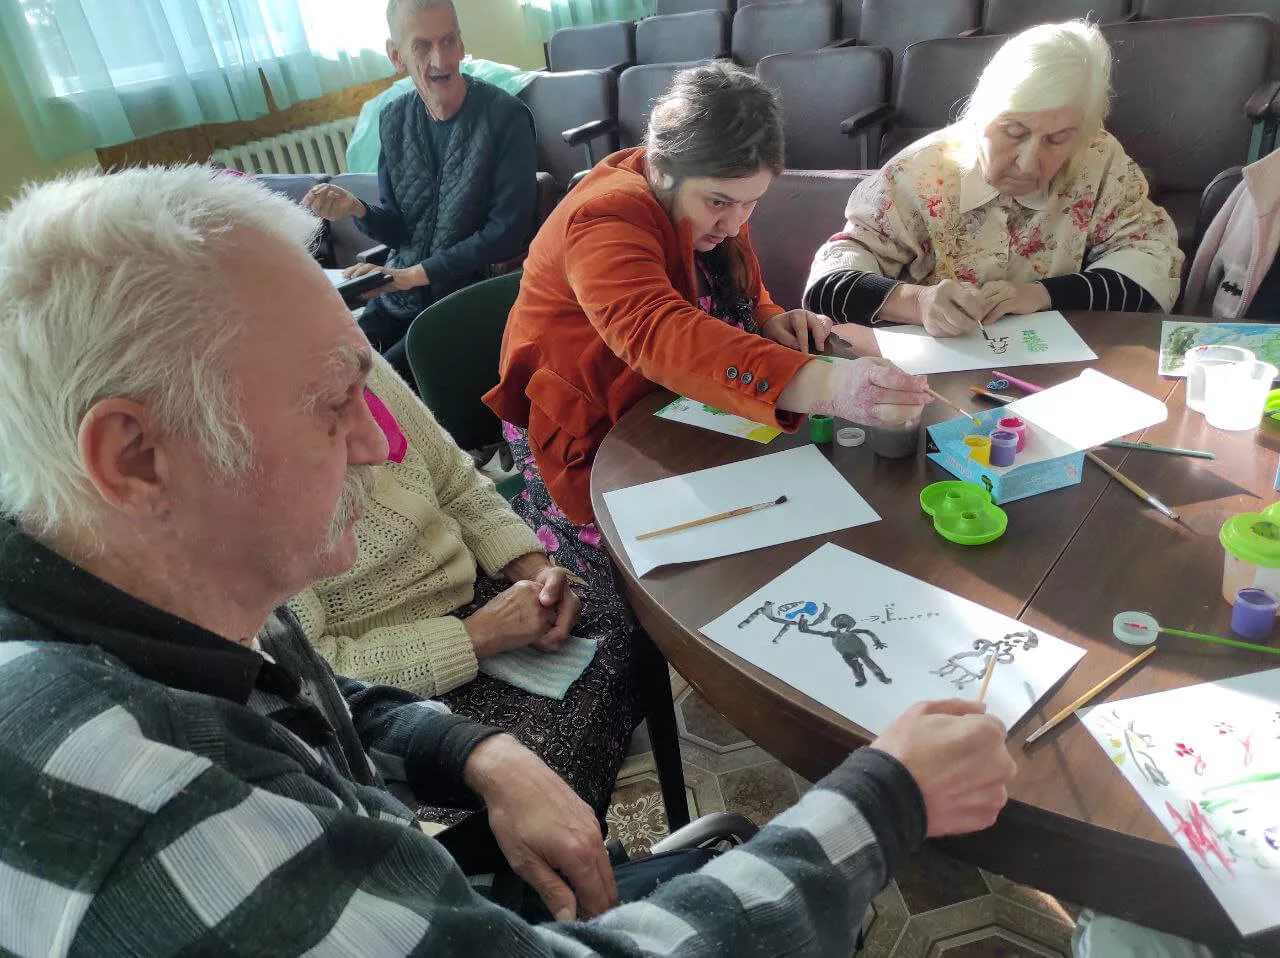 Participants of the Active Longevity Program engage in art-based activities to express themselves.